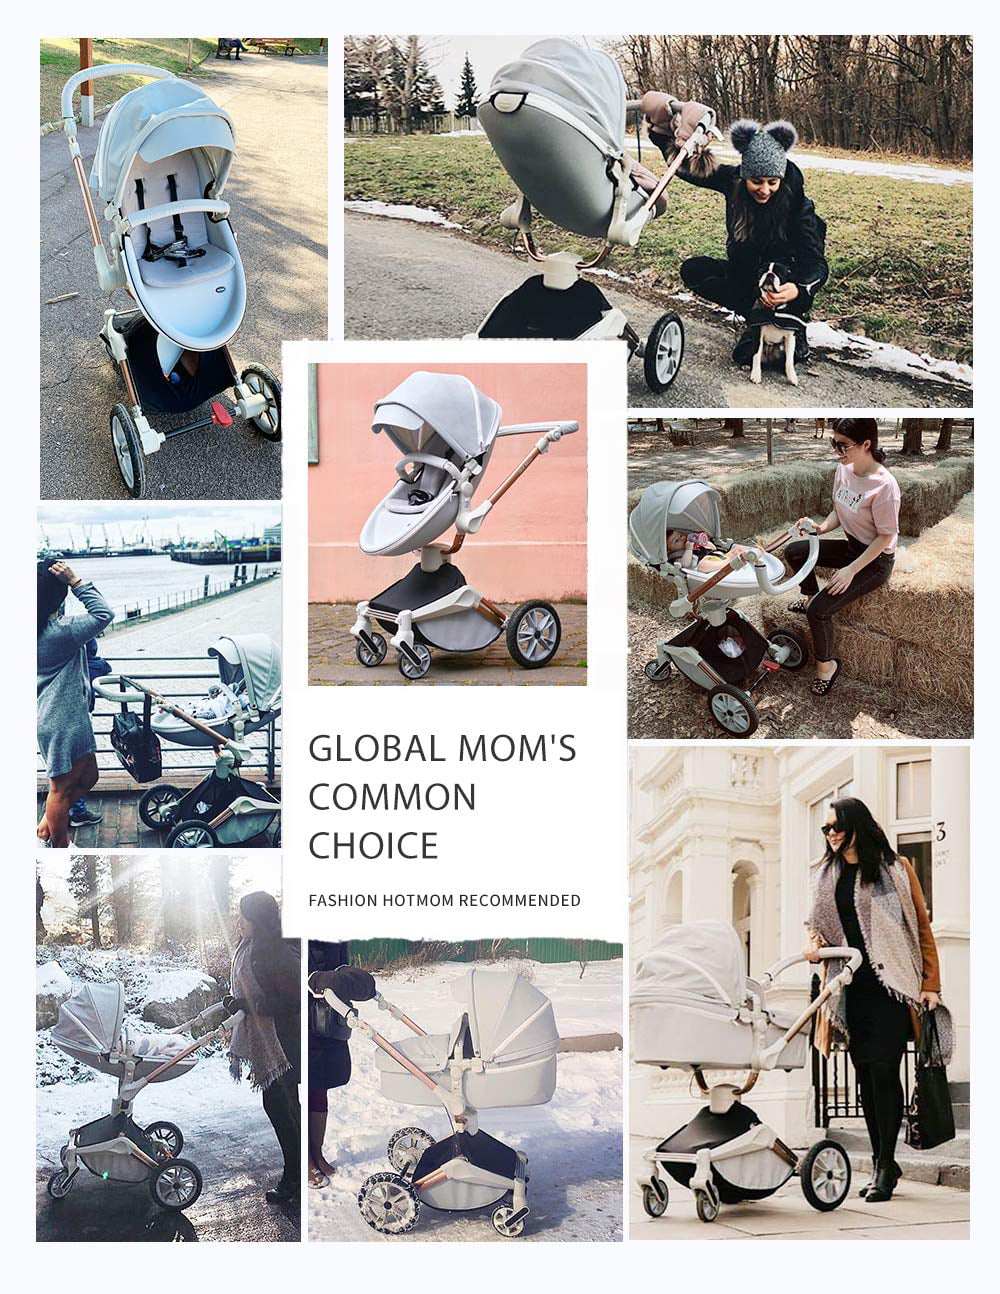 Hot Mom Pushchair 2018,3 in 1 Travel System with 360 Rotation Function,Grey